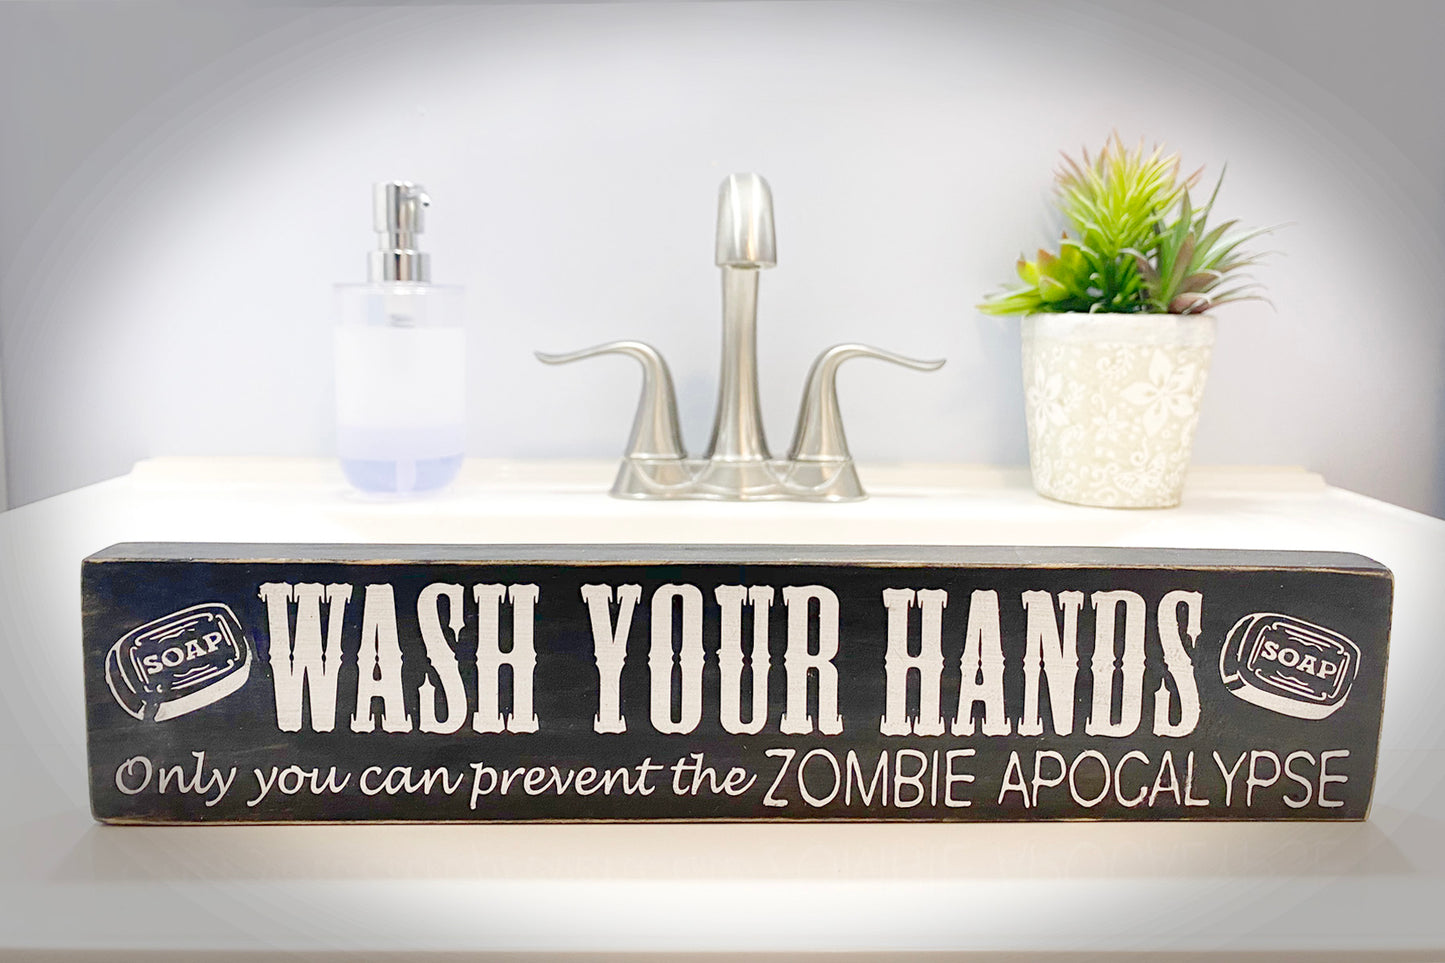 Wash Your Hands! Only You Can Prevent the Zombie Apocalypse BATHROOM wood sign, 12" x 2", funny, new home gift, bathroom decor.